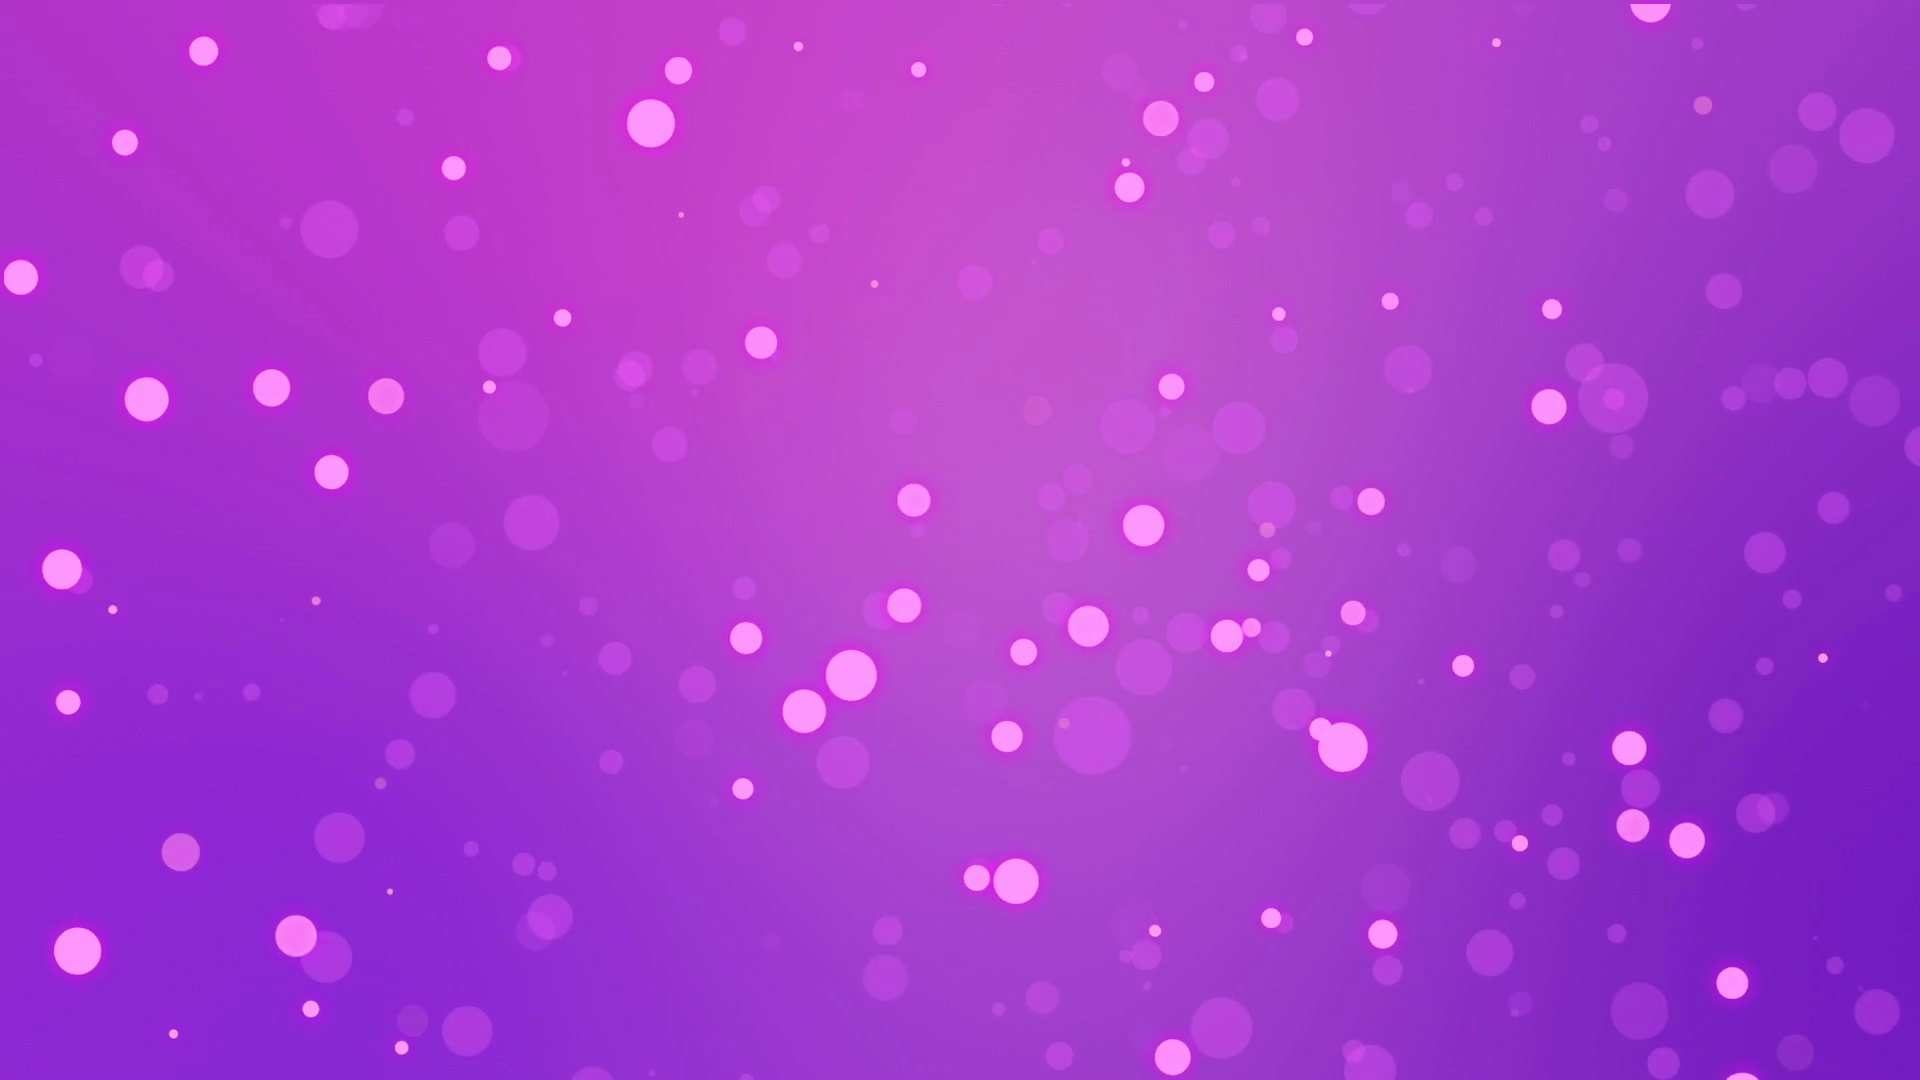 Fun purple pink bokeh background with floating light bubble ...